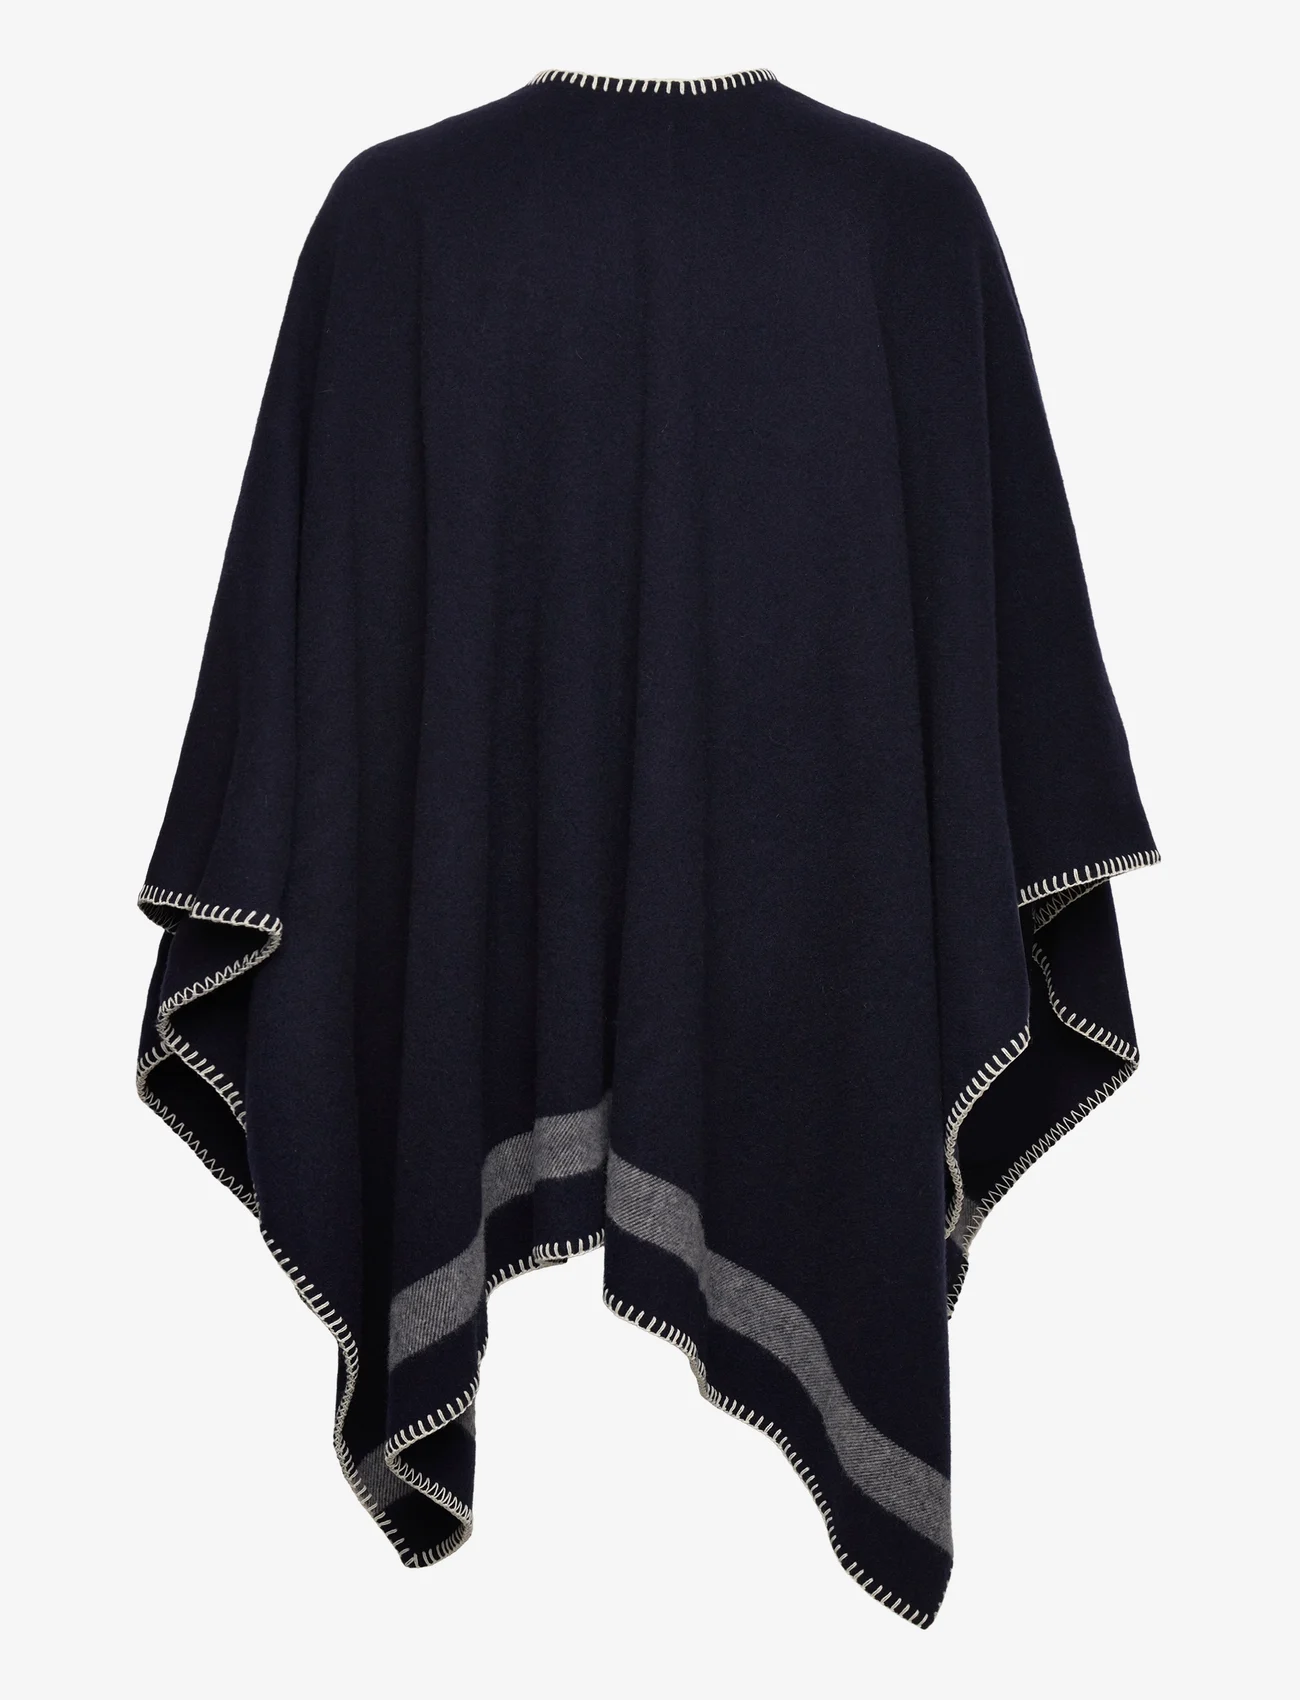 Lexington Clothing - Palma Blanket Stitched Recycled Wool Blend Poncho - ponchos & capes - dk blue/white stripe - 1